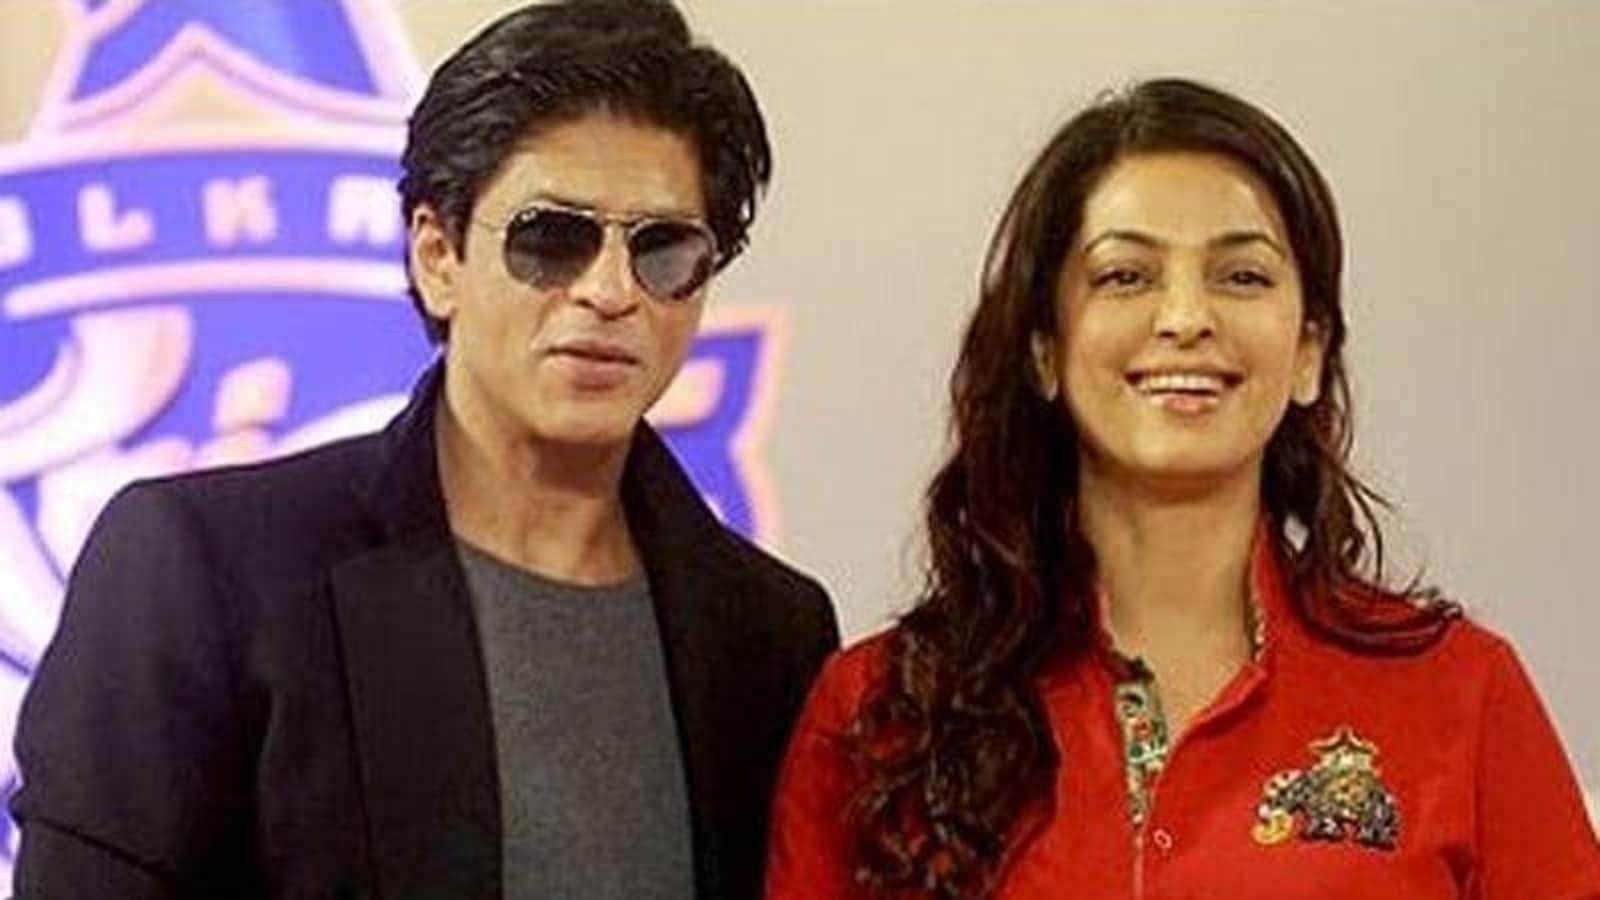 Xxx Videos Juhi Chawala - Shah Rukh Khan once reached Juhi Chawla's party after she was fast asleep:  'He came after 2.30 am' | Bollywood - Hindustan Times